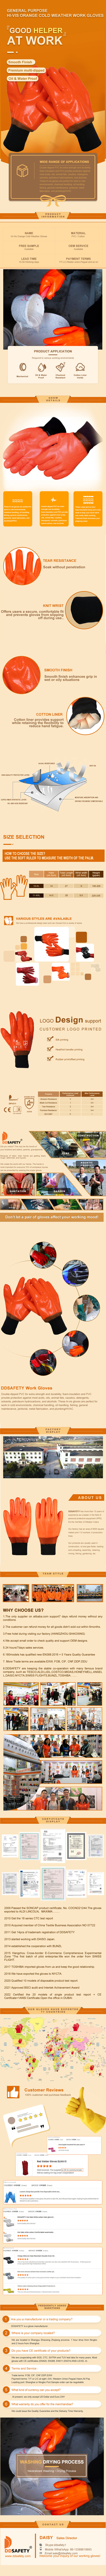 High Visibility Pvc Chemical Resistant Gloves With Foam Lining, Knit Wrist - DPV311 High Visibility Pvc Chemical Resistant Gloves With Foam Lining, Knit Wrist - DPV311 gloves,pvc gloves,PVC Coated Gloves,Chemical Resistant Gloves,High Visibility pvc gloves